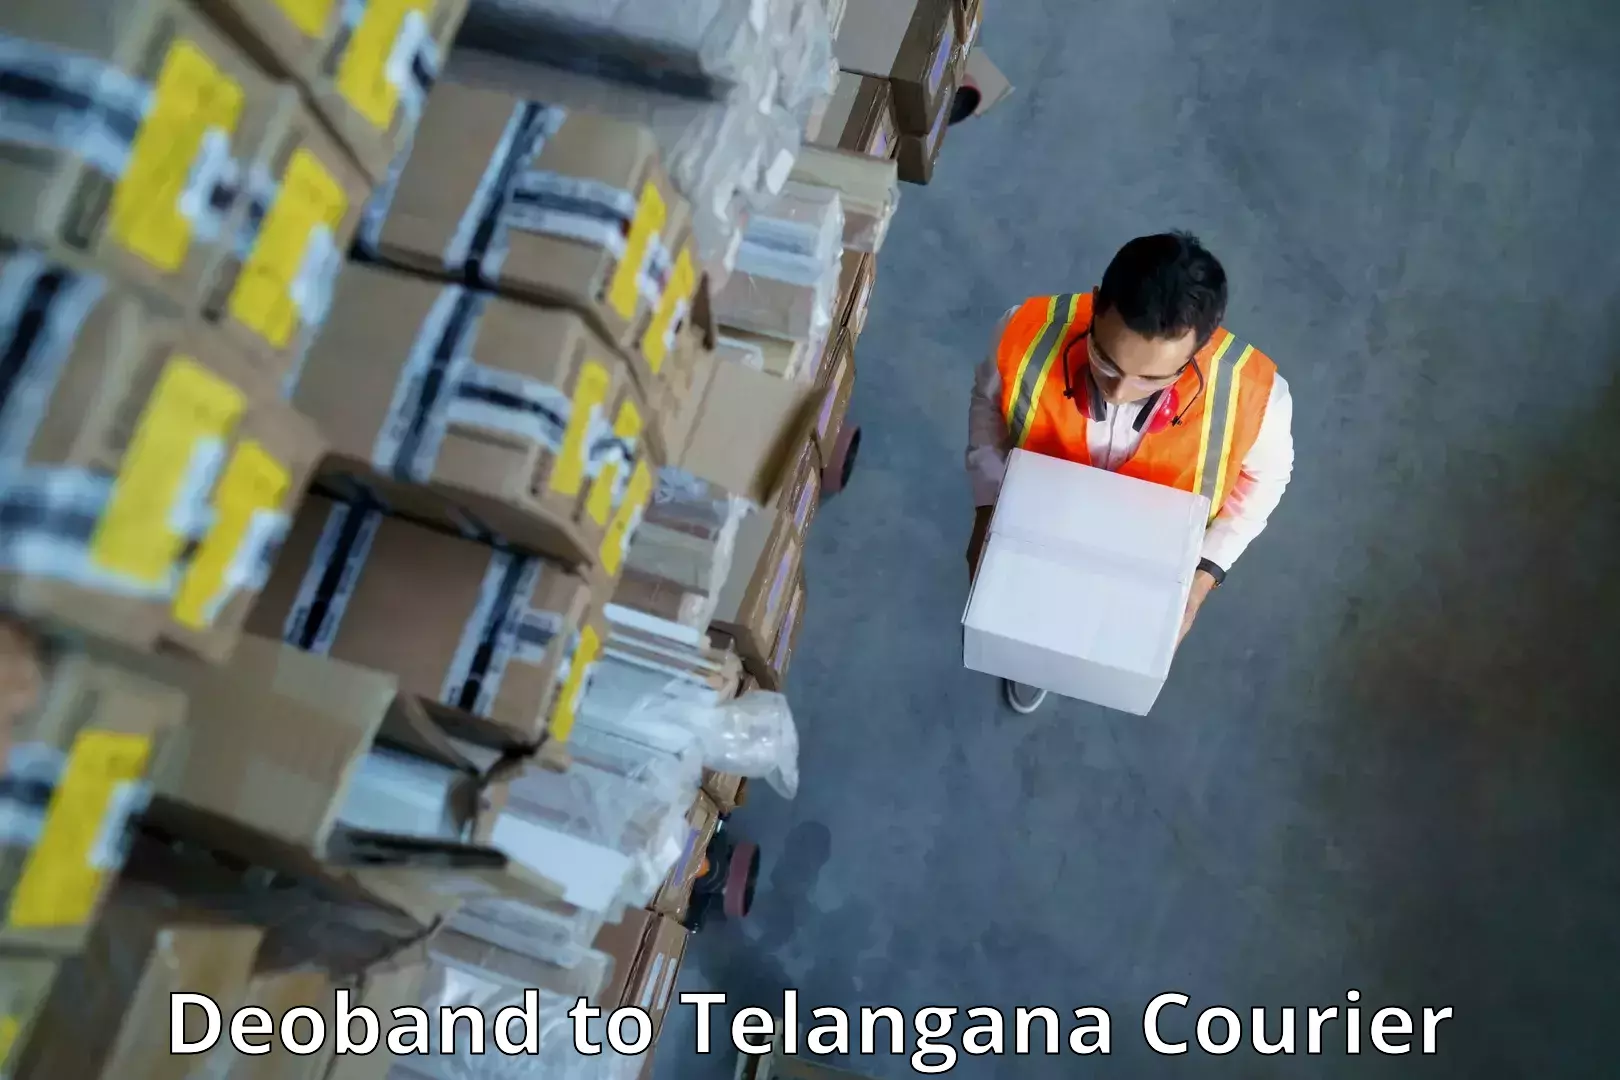 Efficient parcel service Deoband to Gollapalli